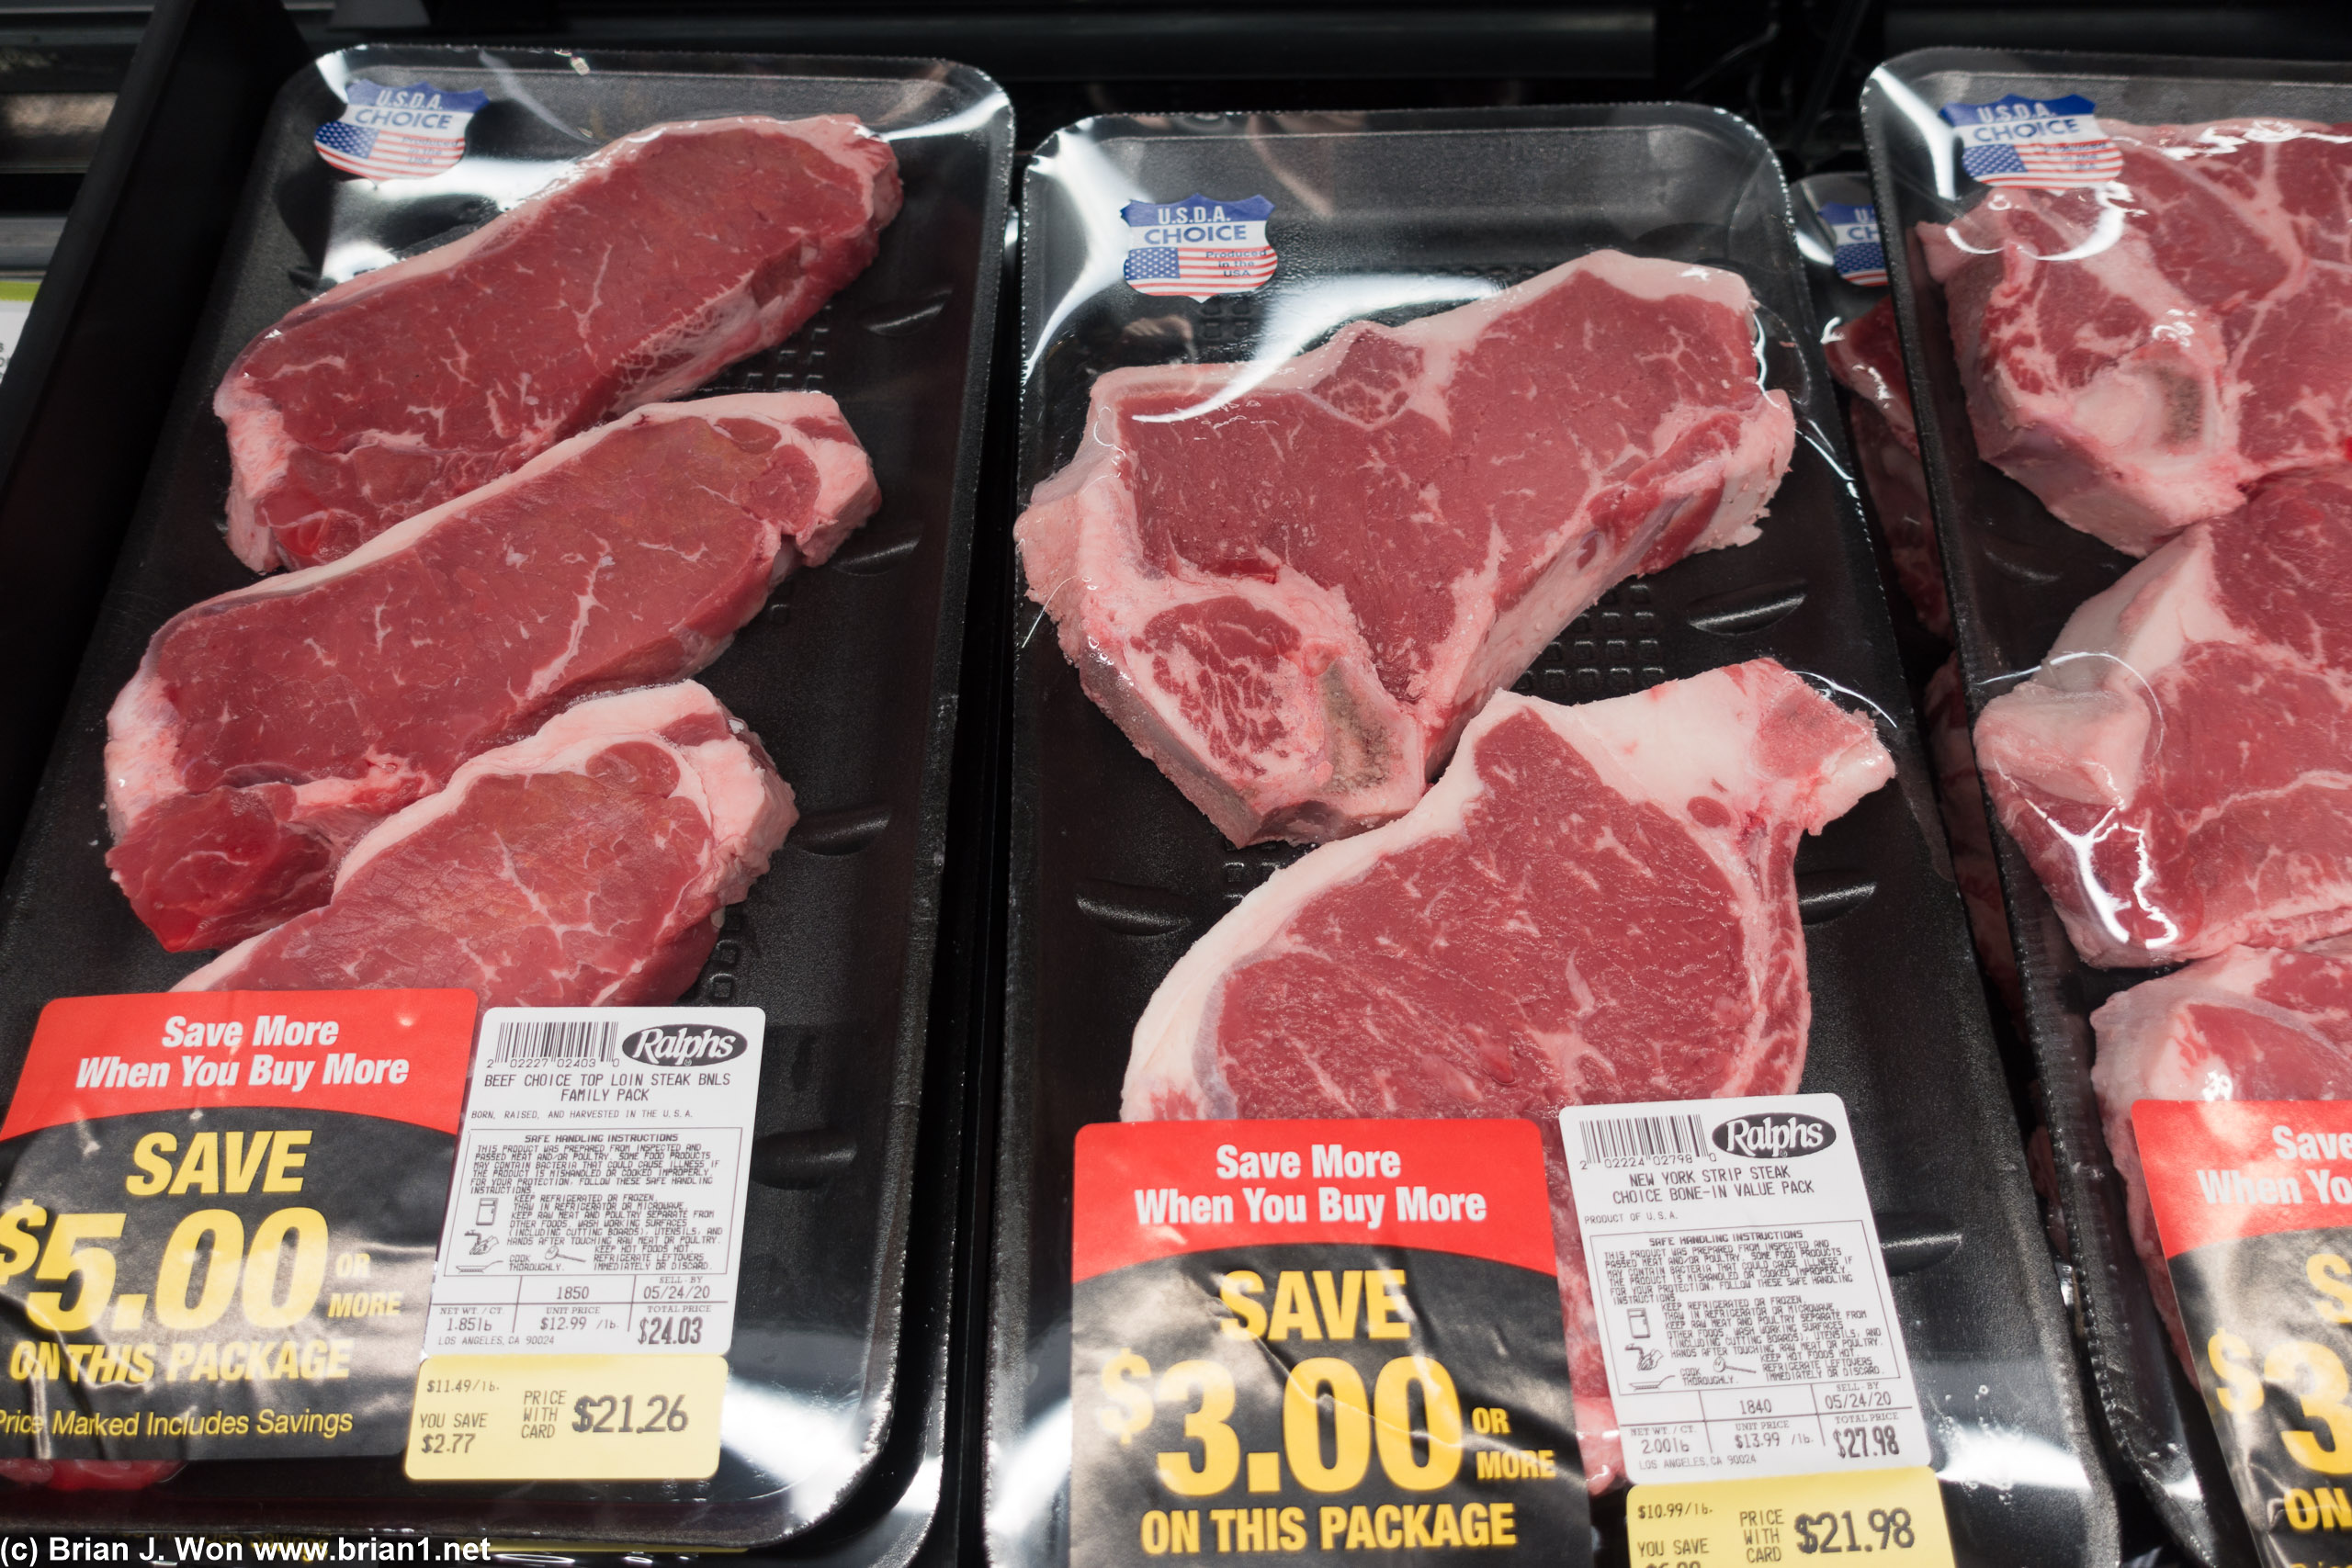 Even steak is seems normally priced.